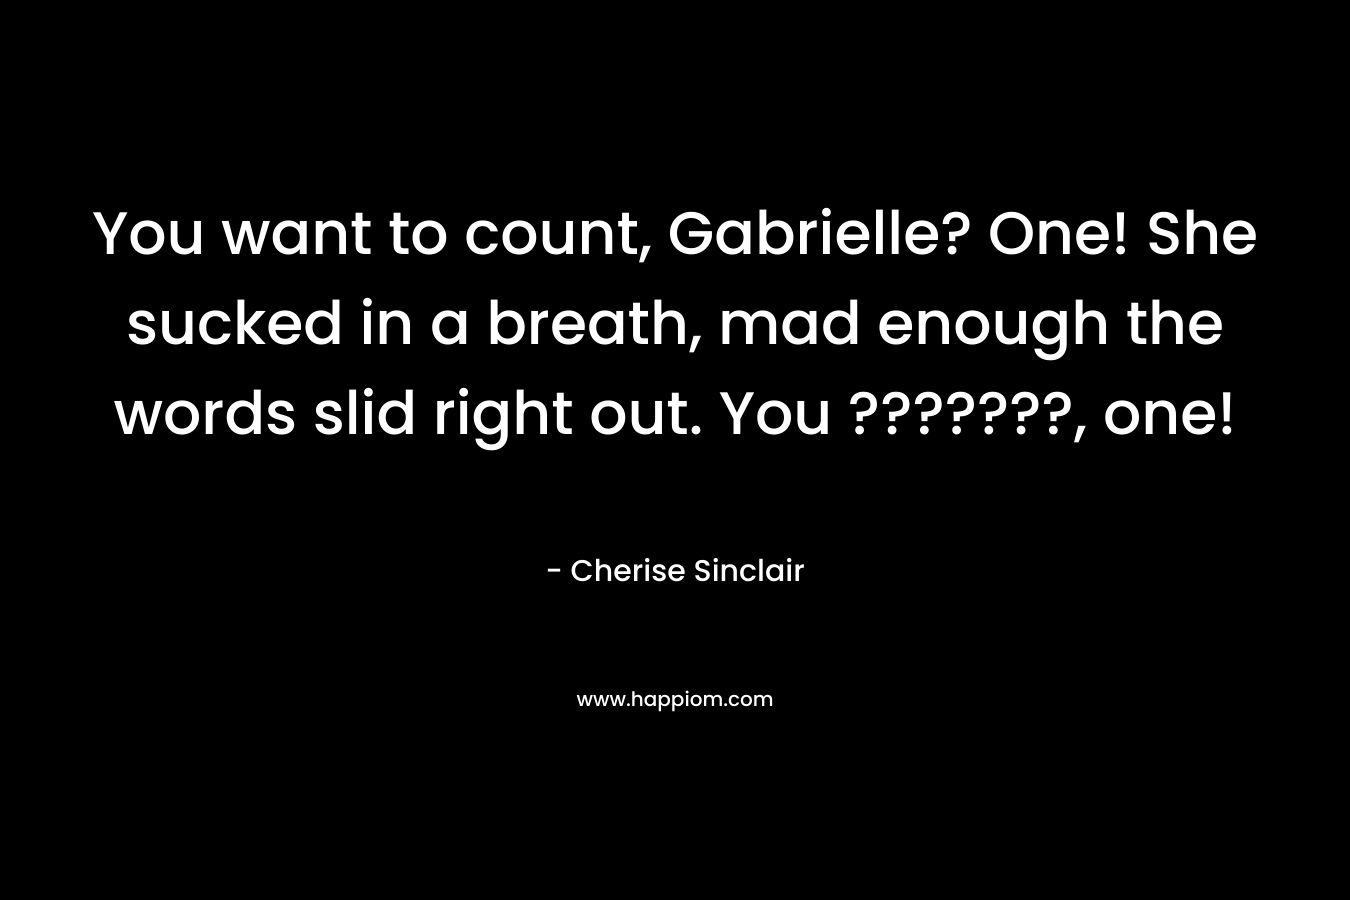 You want to count, Gabrielle? One! She sucked in a breath, mad enough the words slid right out. You ???????, one! – Cherise Sinclair